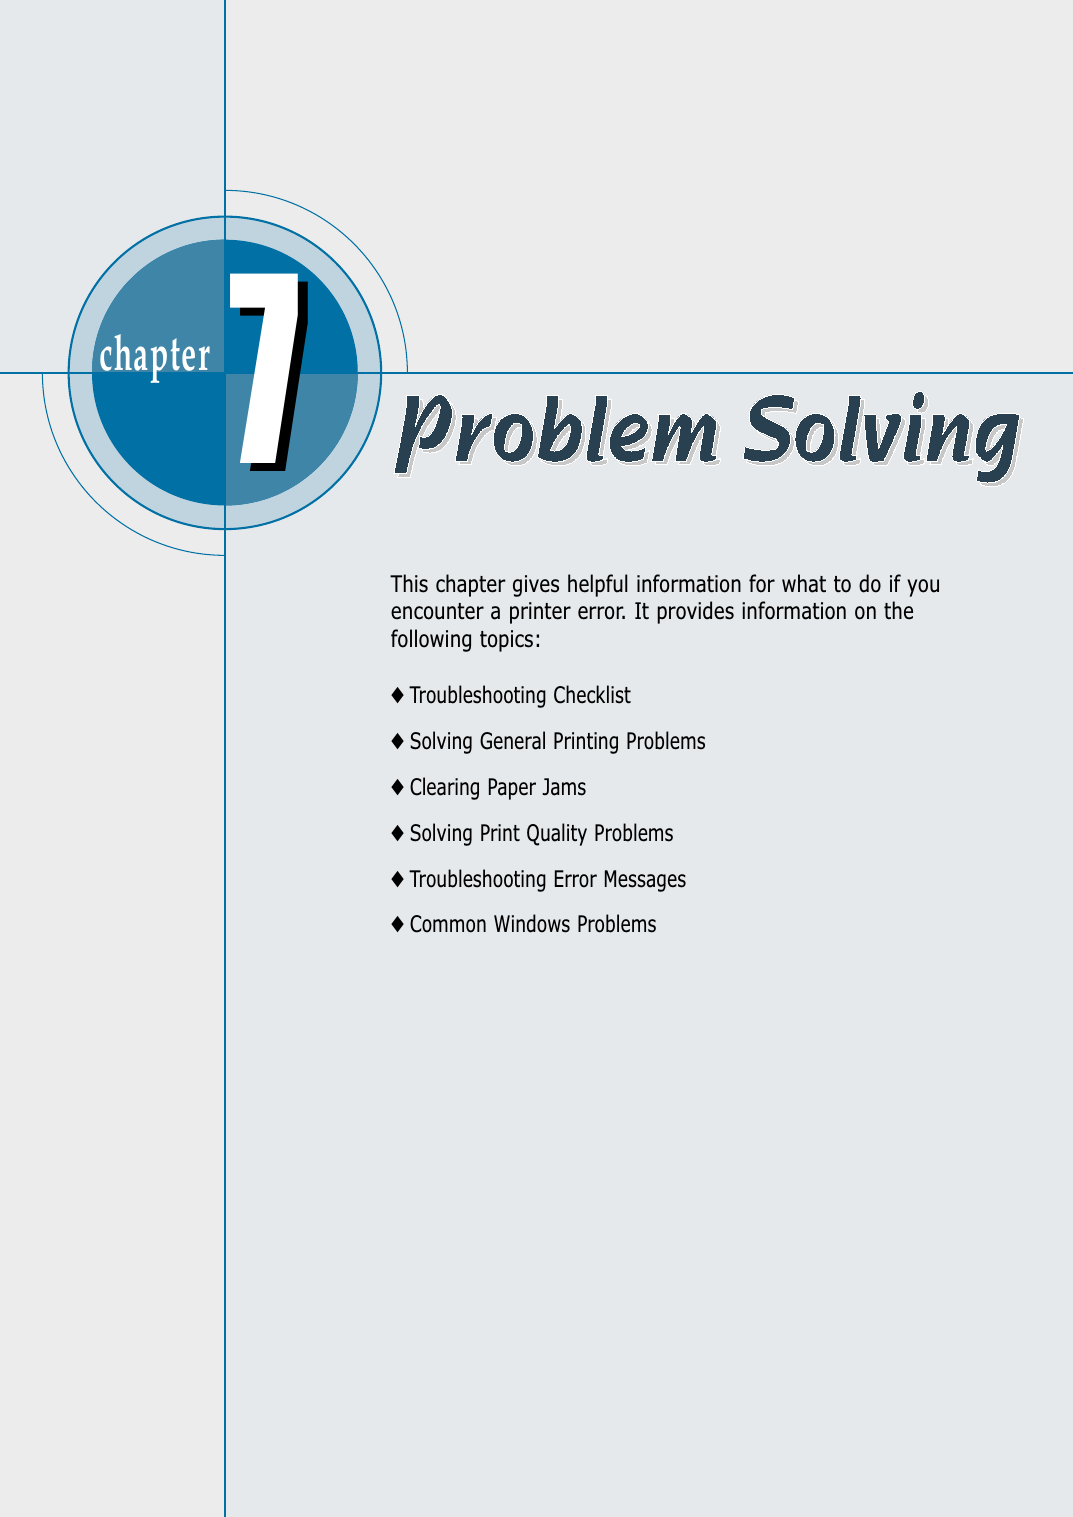 chapter  This chapter gives helpful information for what to do if youencounter a printer error. It provides information on thefollowing topics:◆ Troubleshooting Checklist◆ Solving General Printing Problems◆ Clearing Paper Jams◆ Solving Print Quality Problems◆ Troubleshooting Error Messages◆ Common Windows Problems77